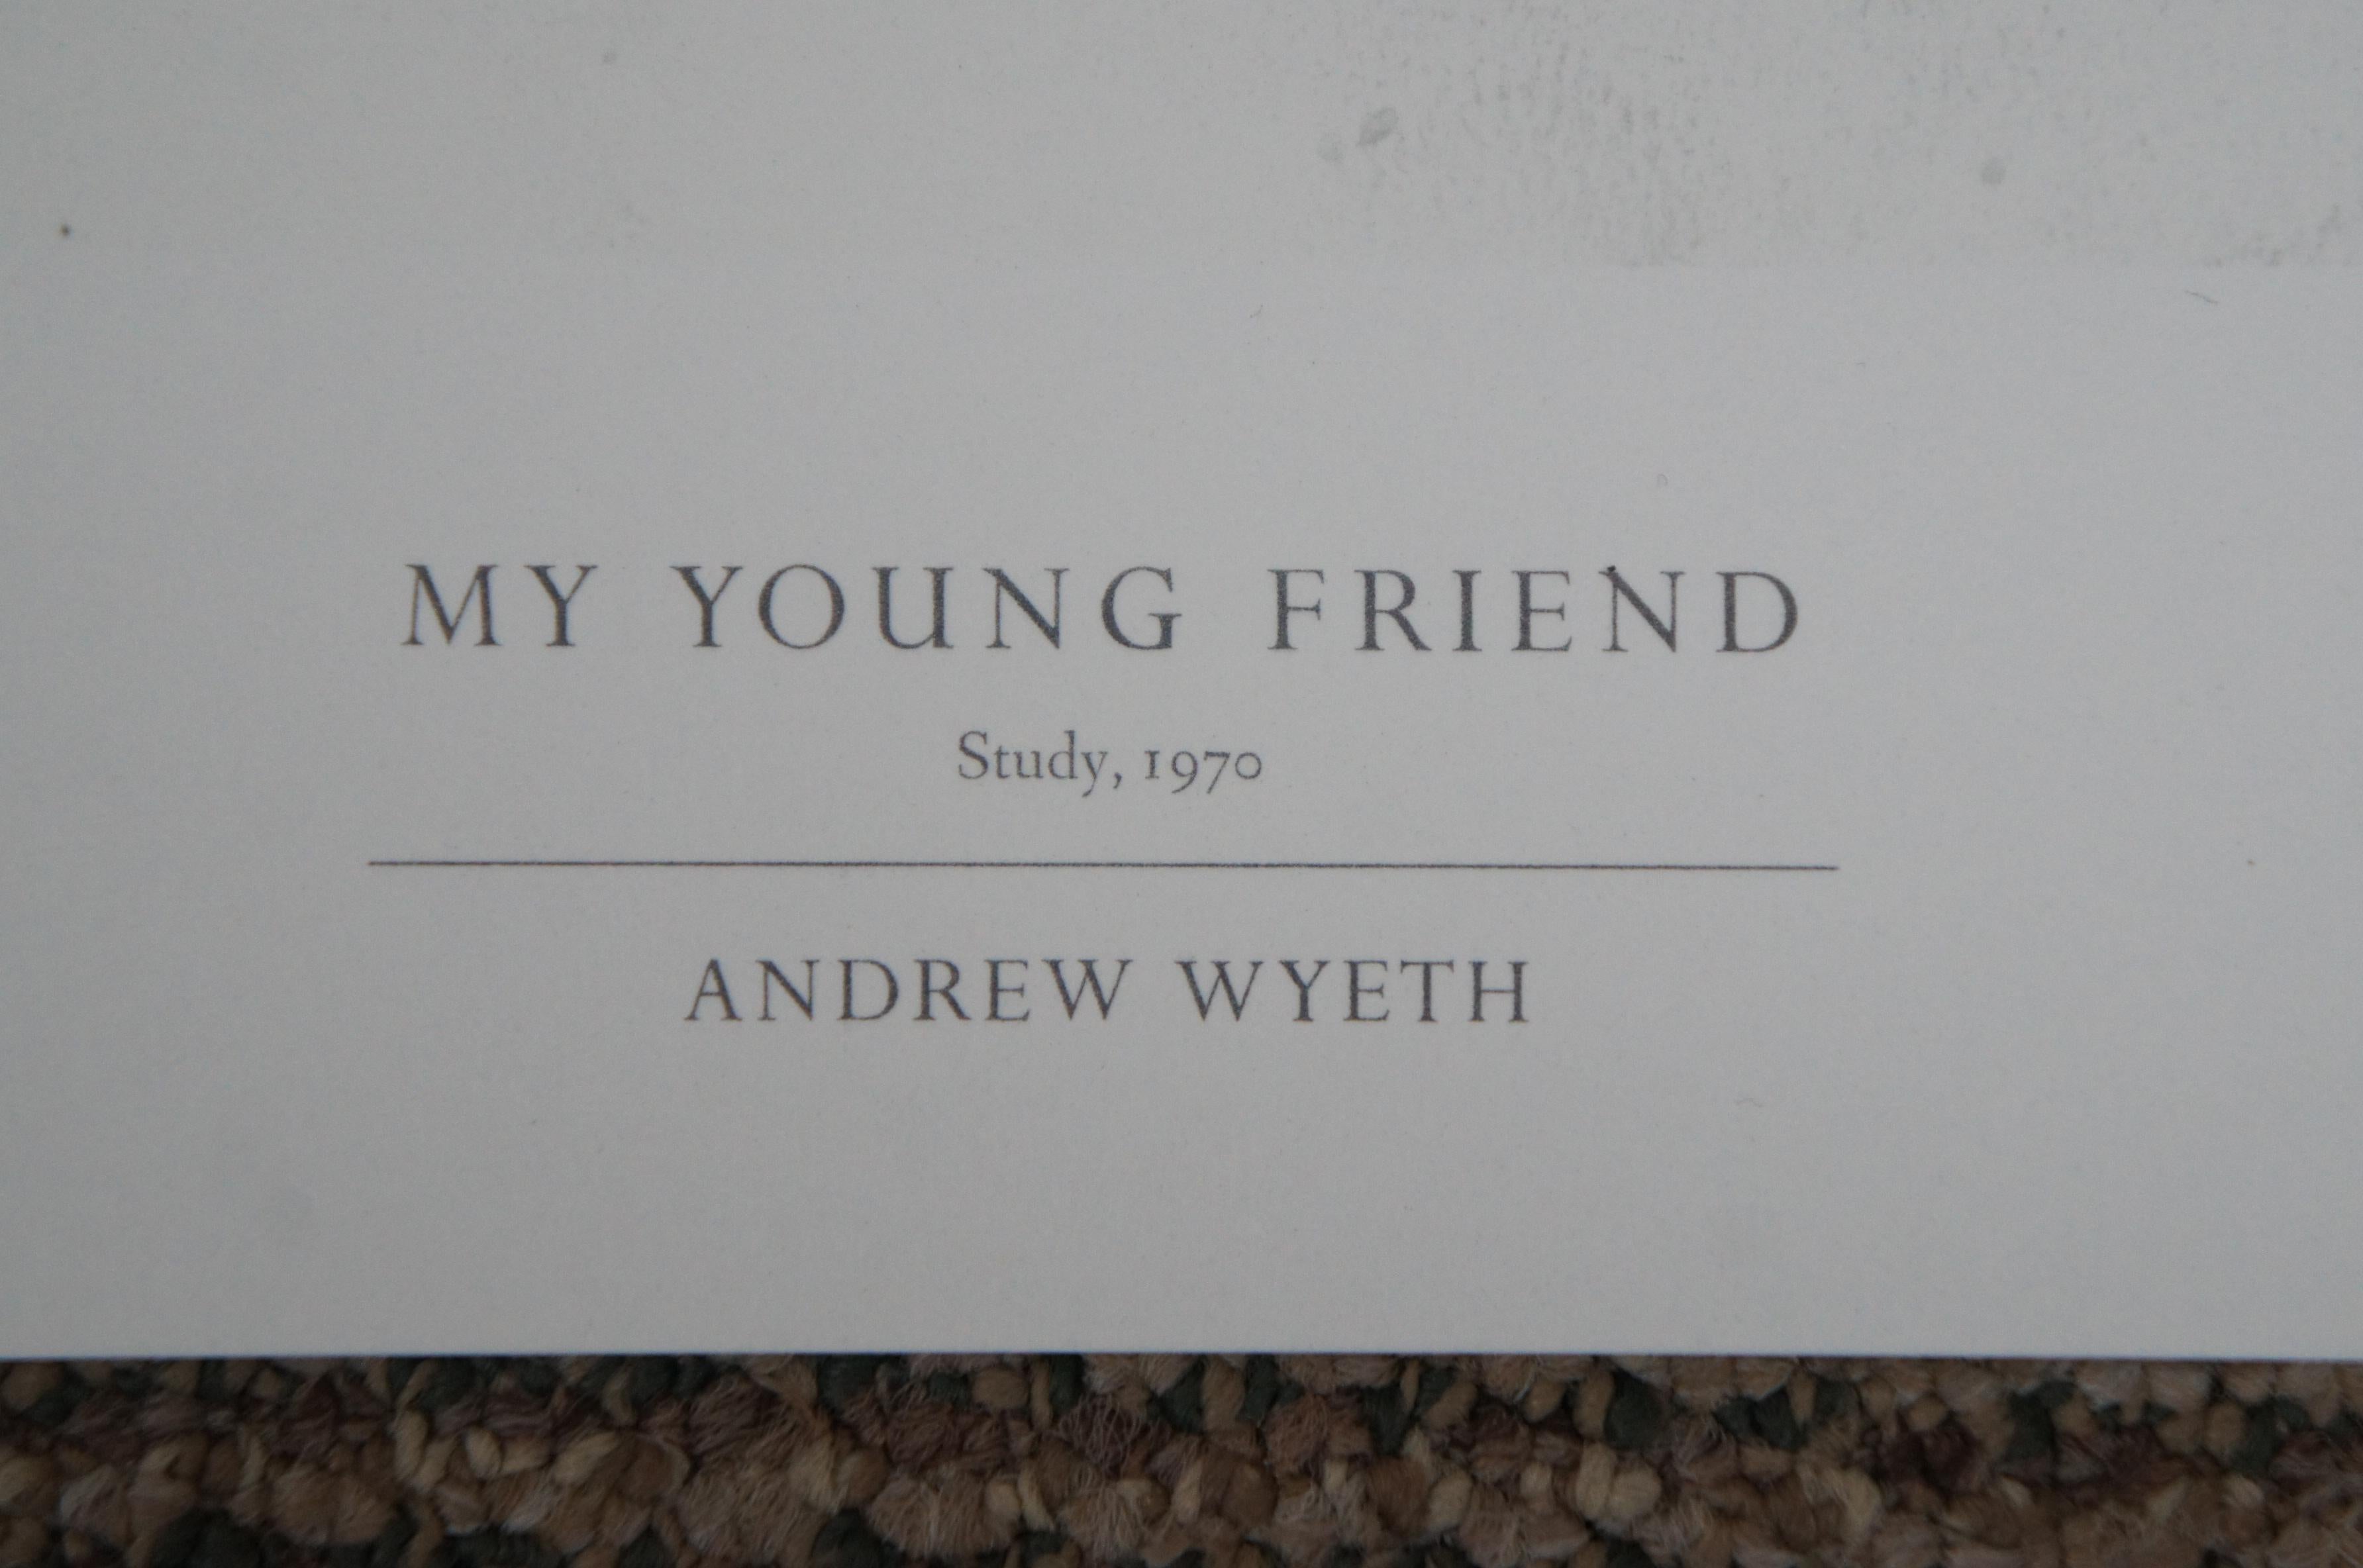 Paper Andrew Wyeth Collotype Print My Young Friend Portrait 1976 Metropolitan Museum 2